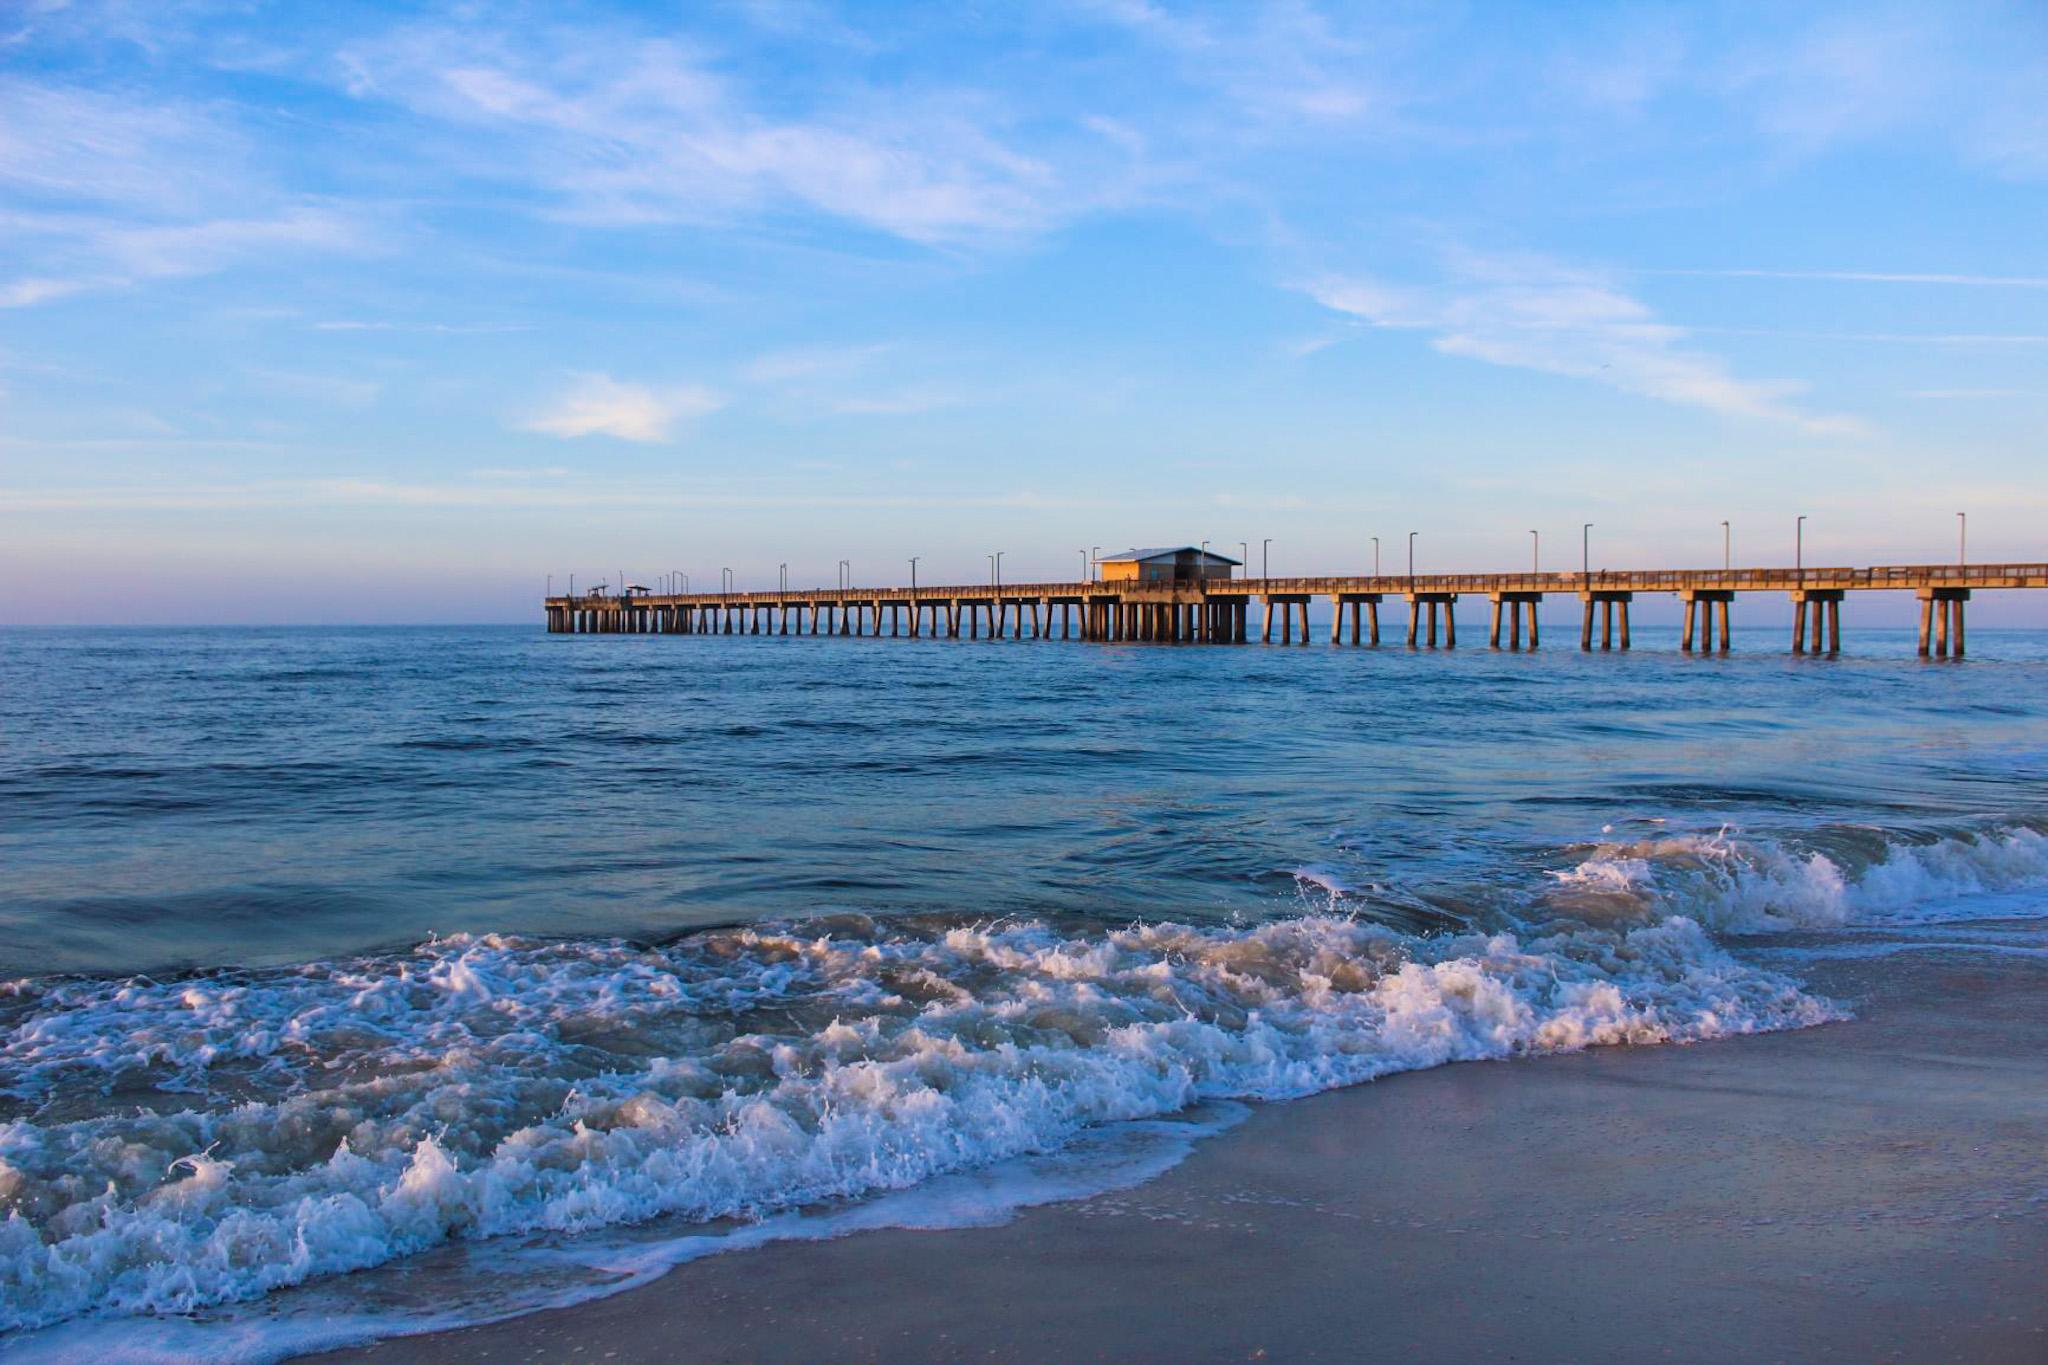 View of the beach and fishing pier.